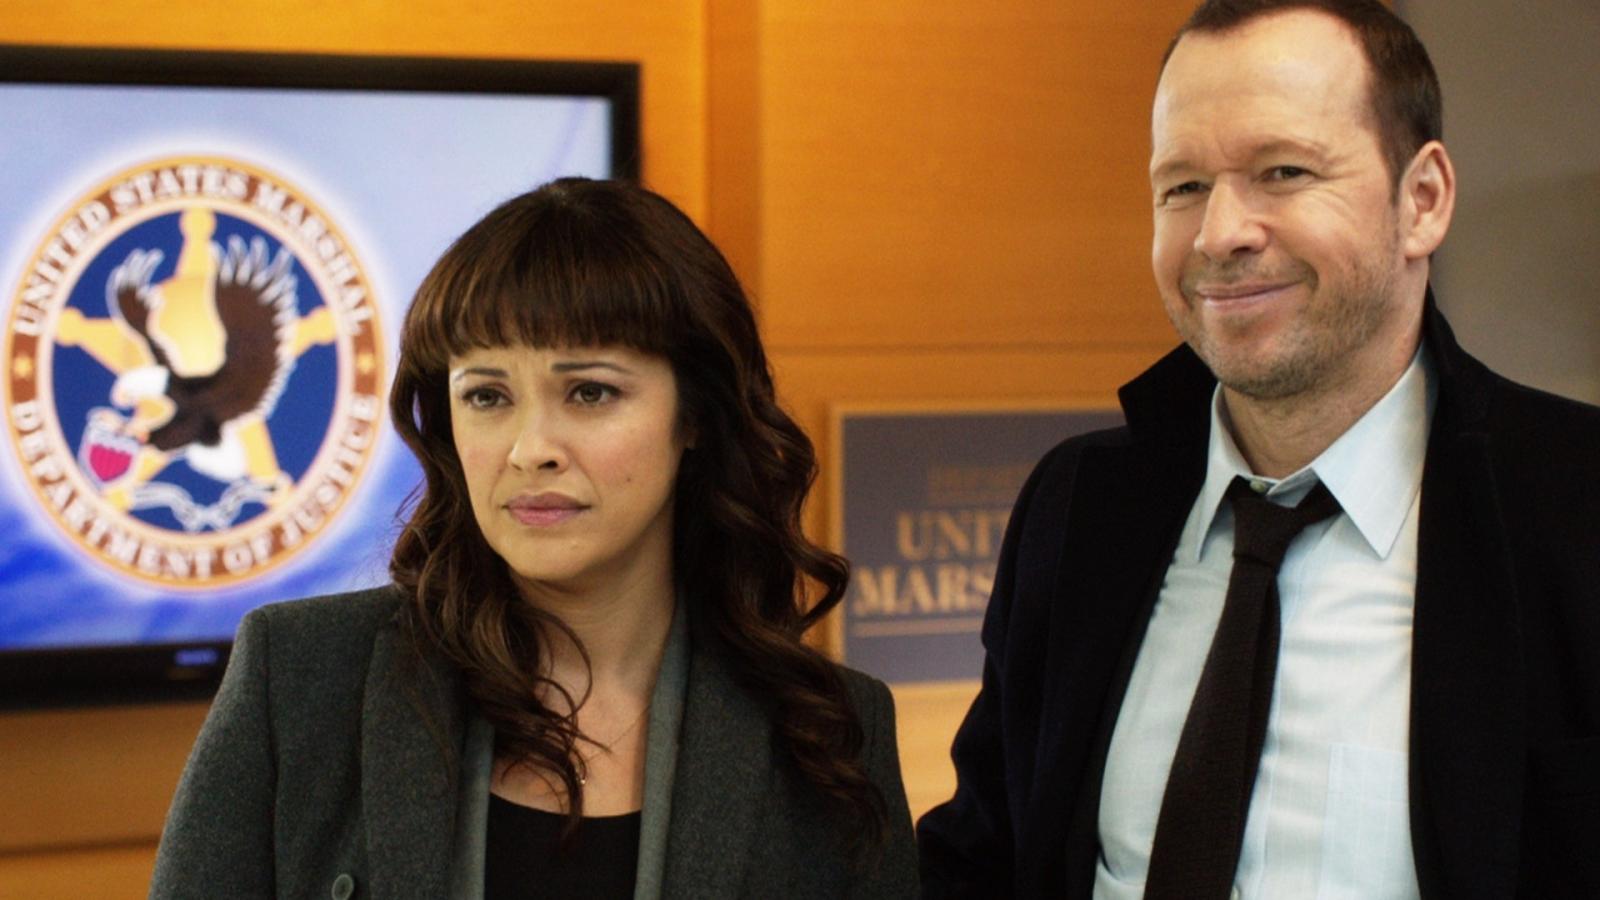 Is Your Zodiac Sign an Eddie or a Danny? Find Out Which Blue Bloods Character You Are - image 11